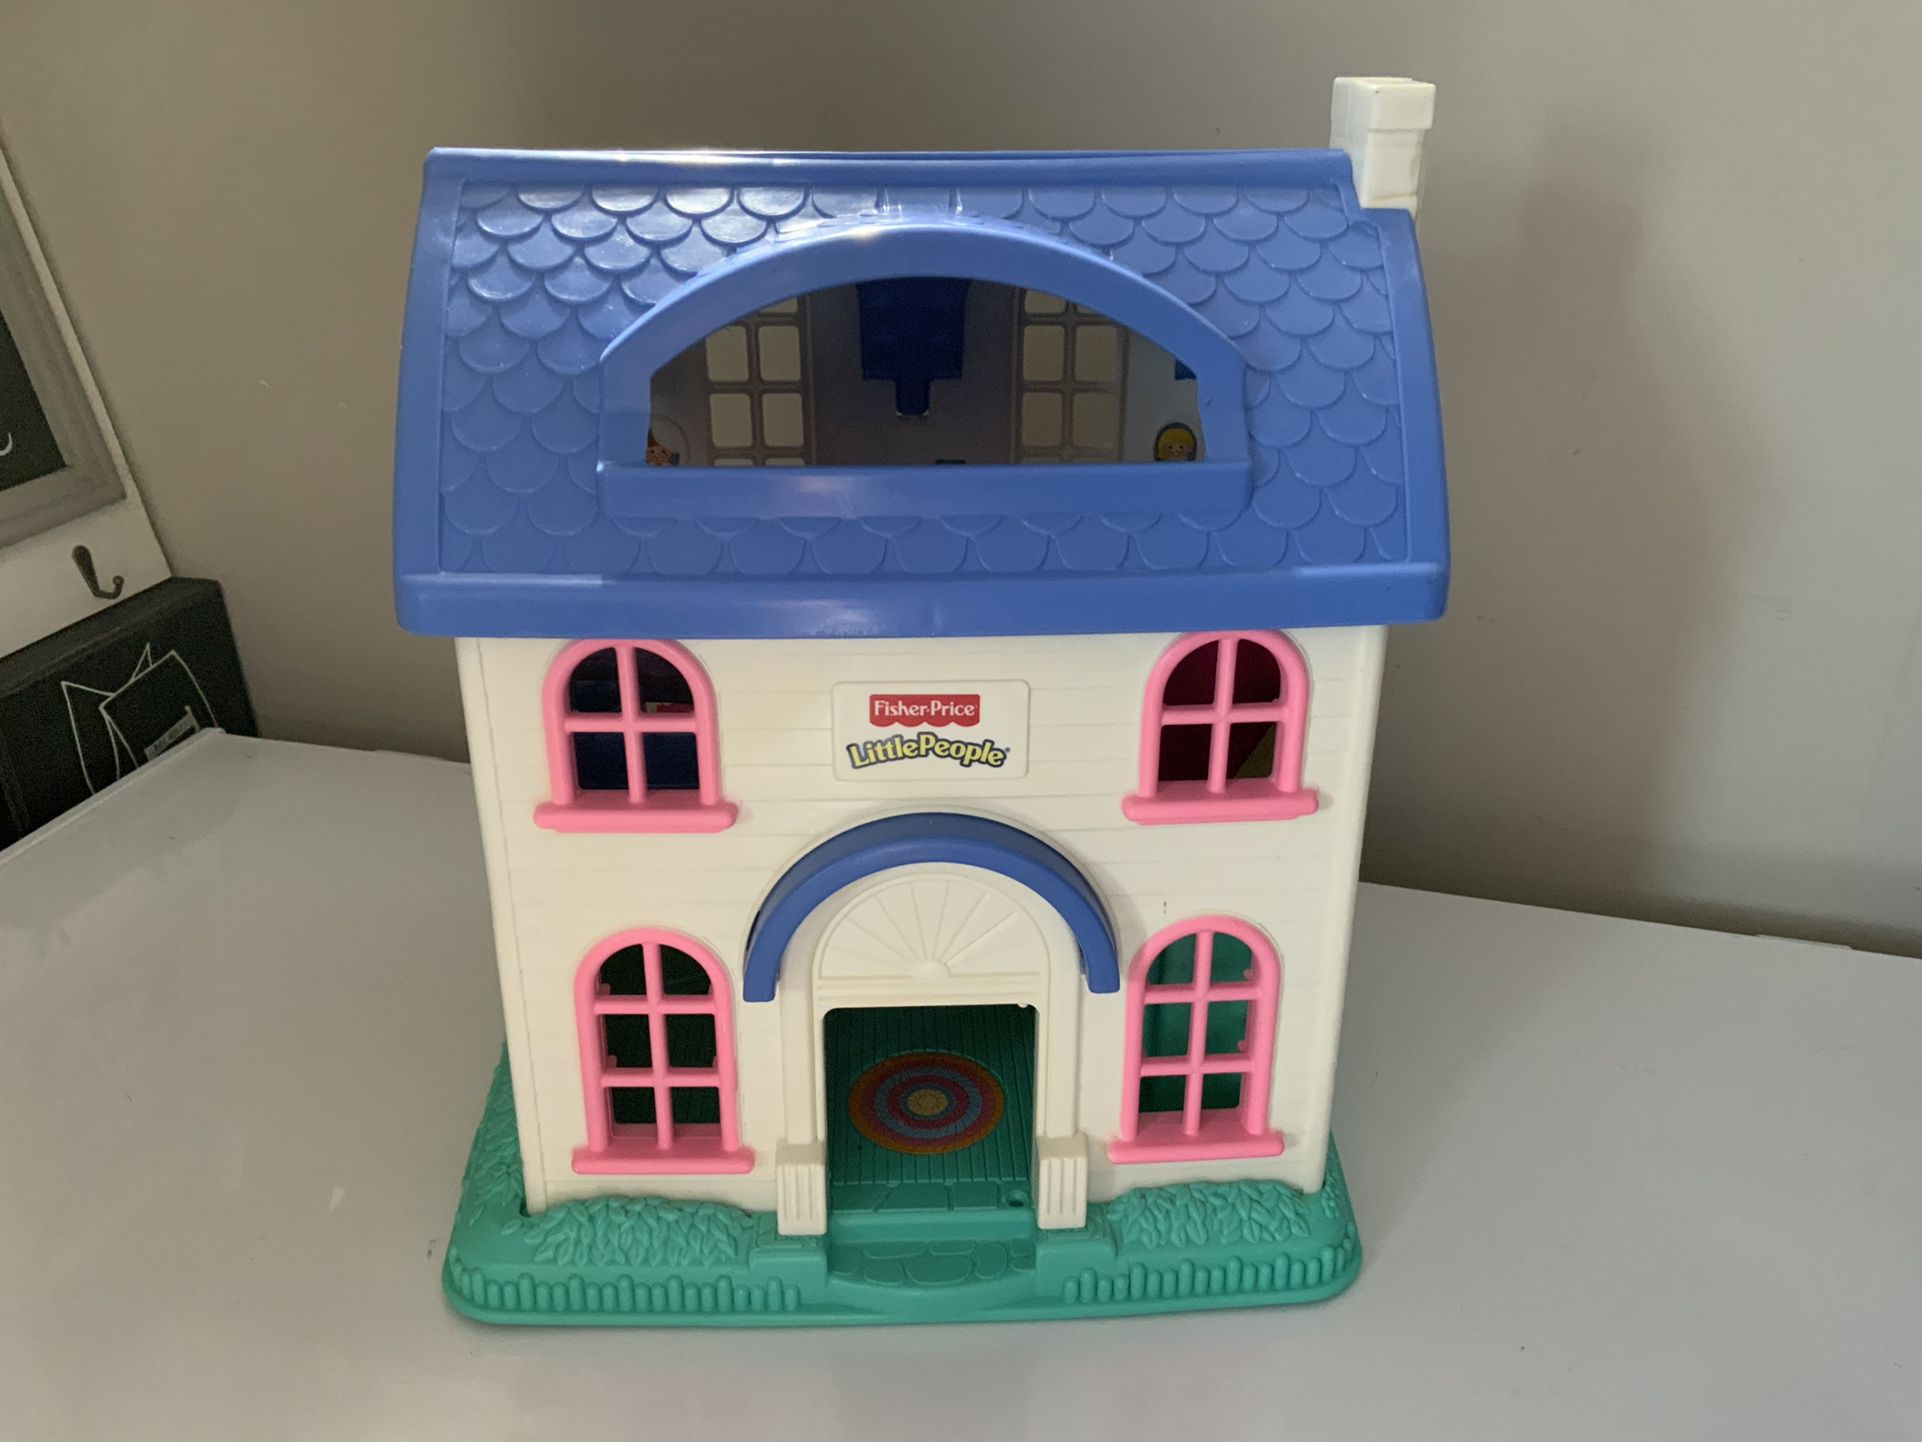 Little People Doll House